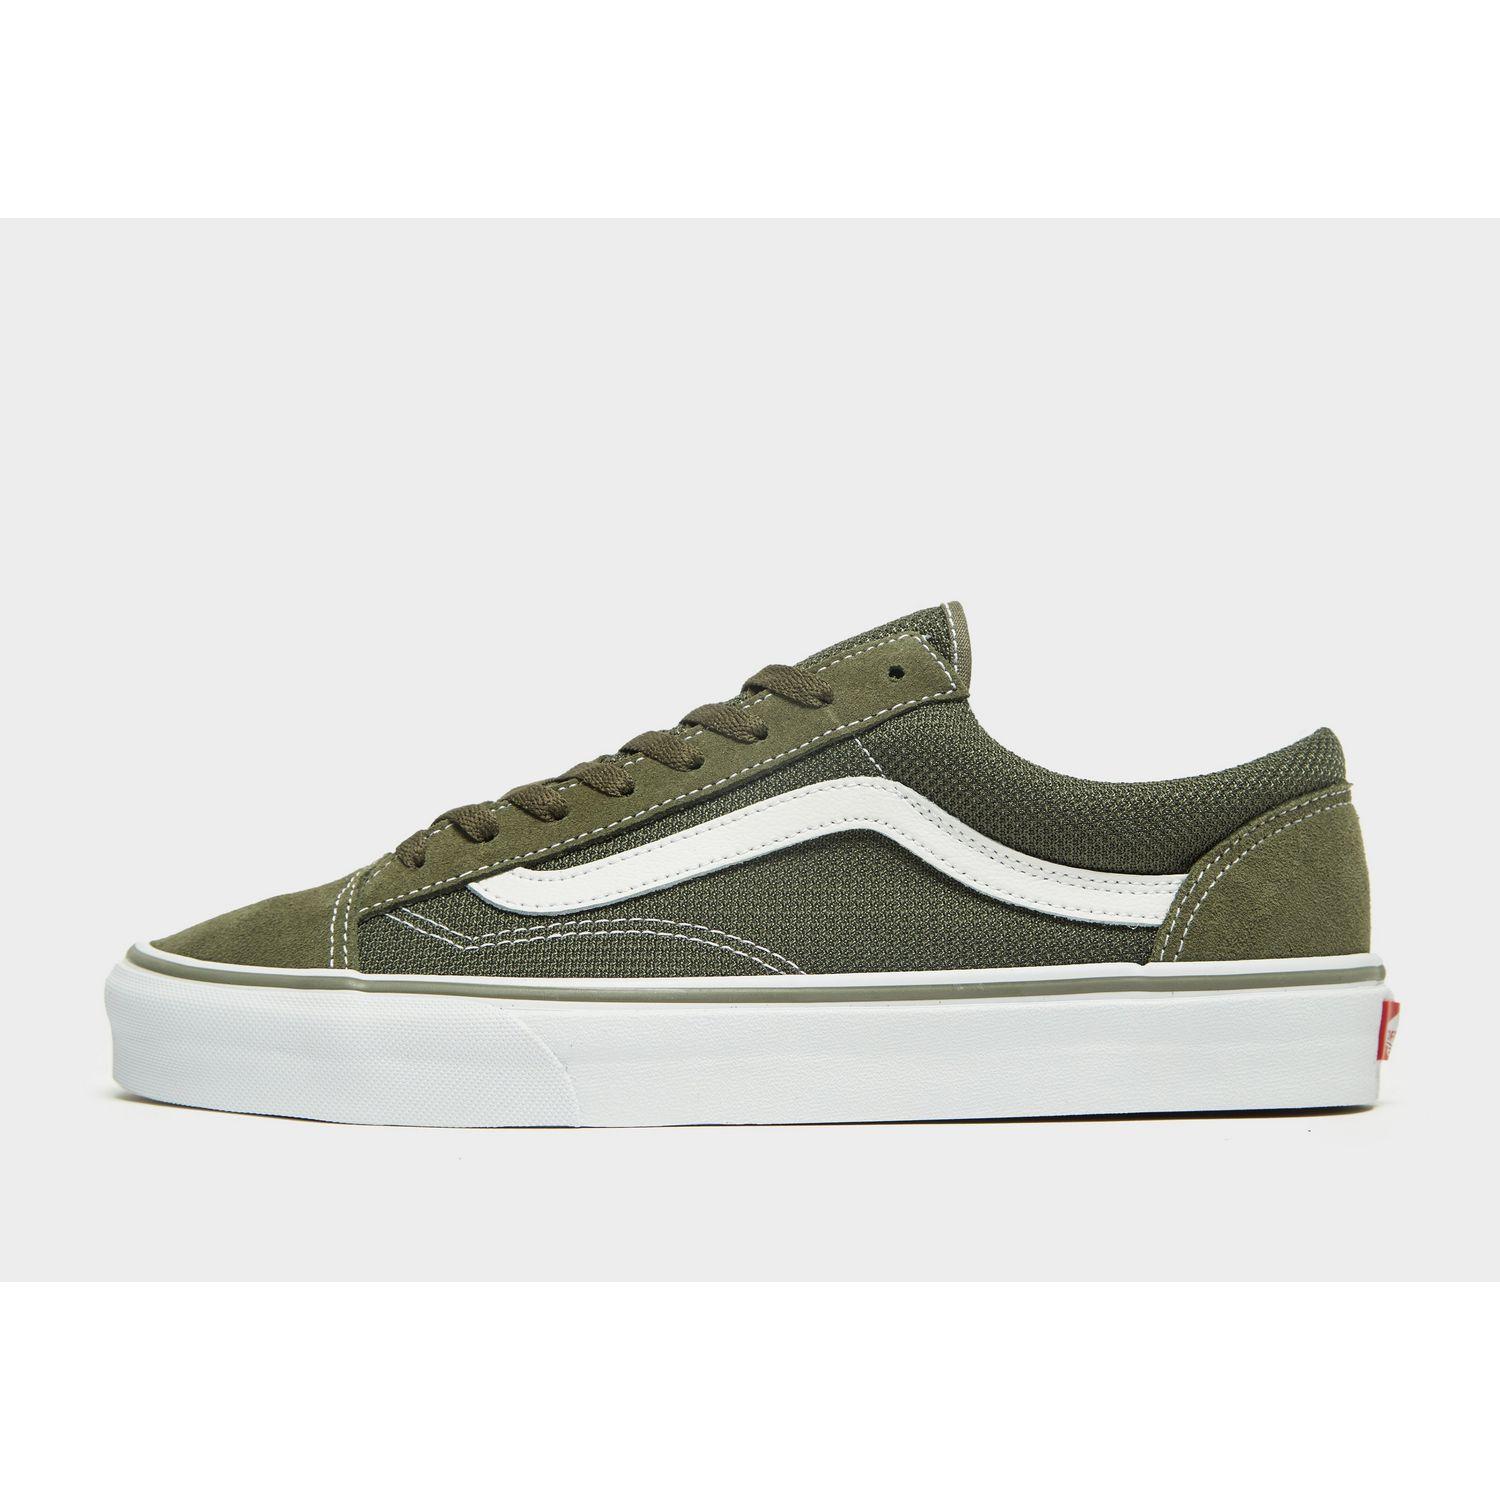 Vans Suede Style 36 Mesh in Green/White 